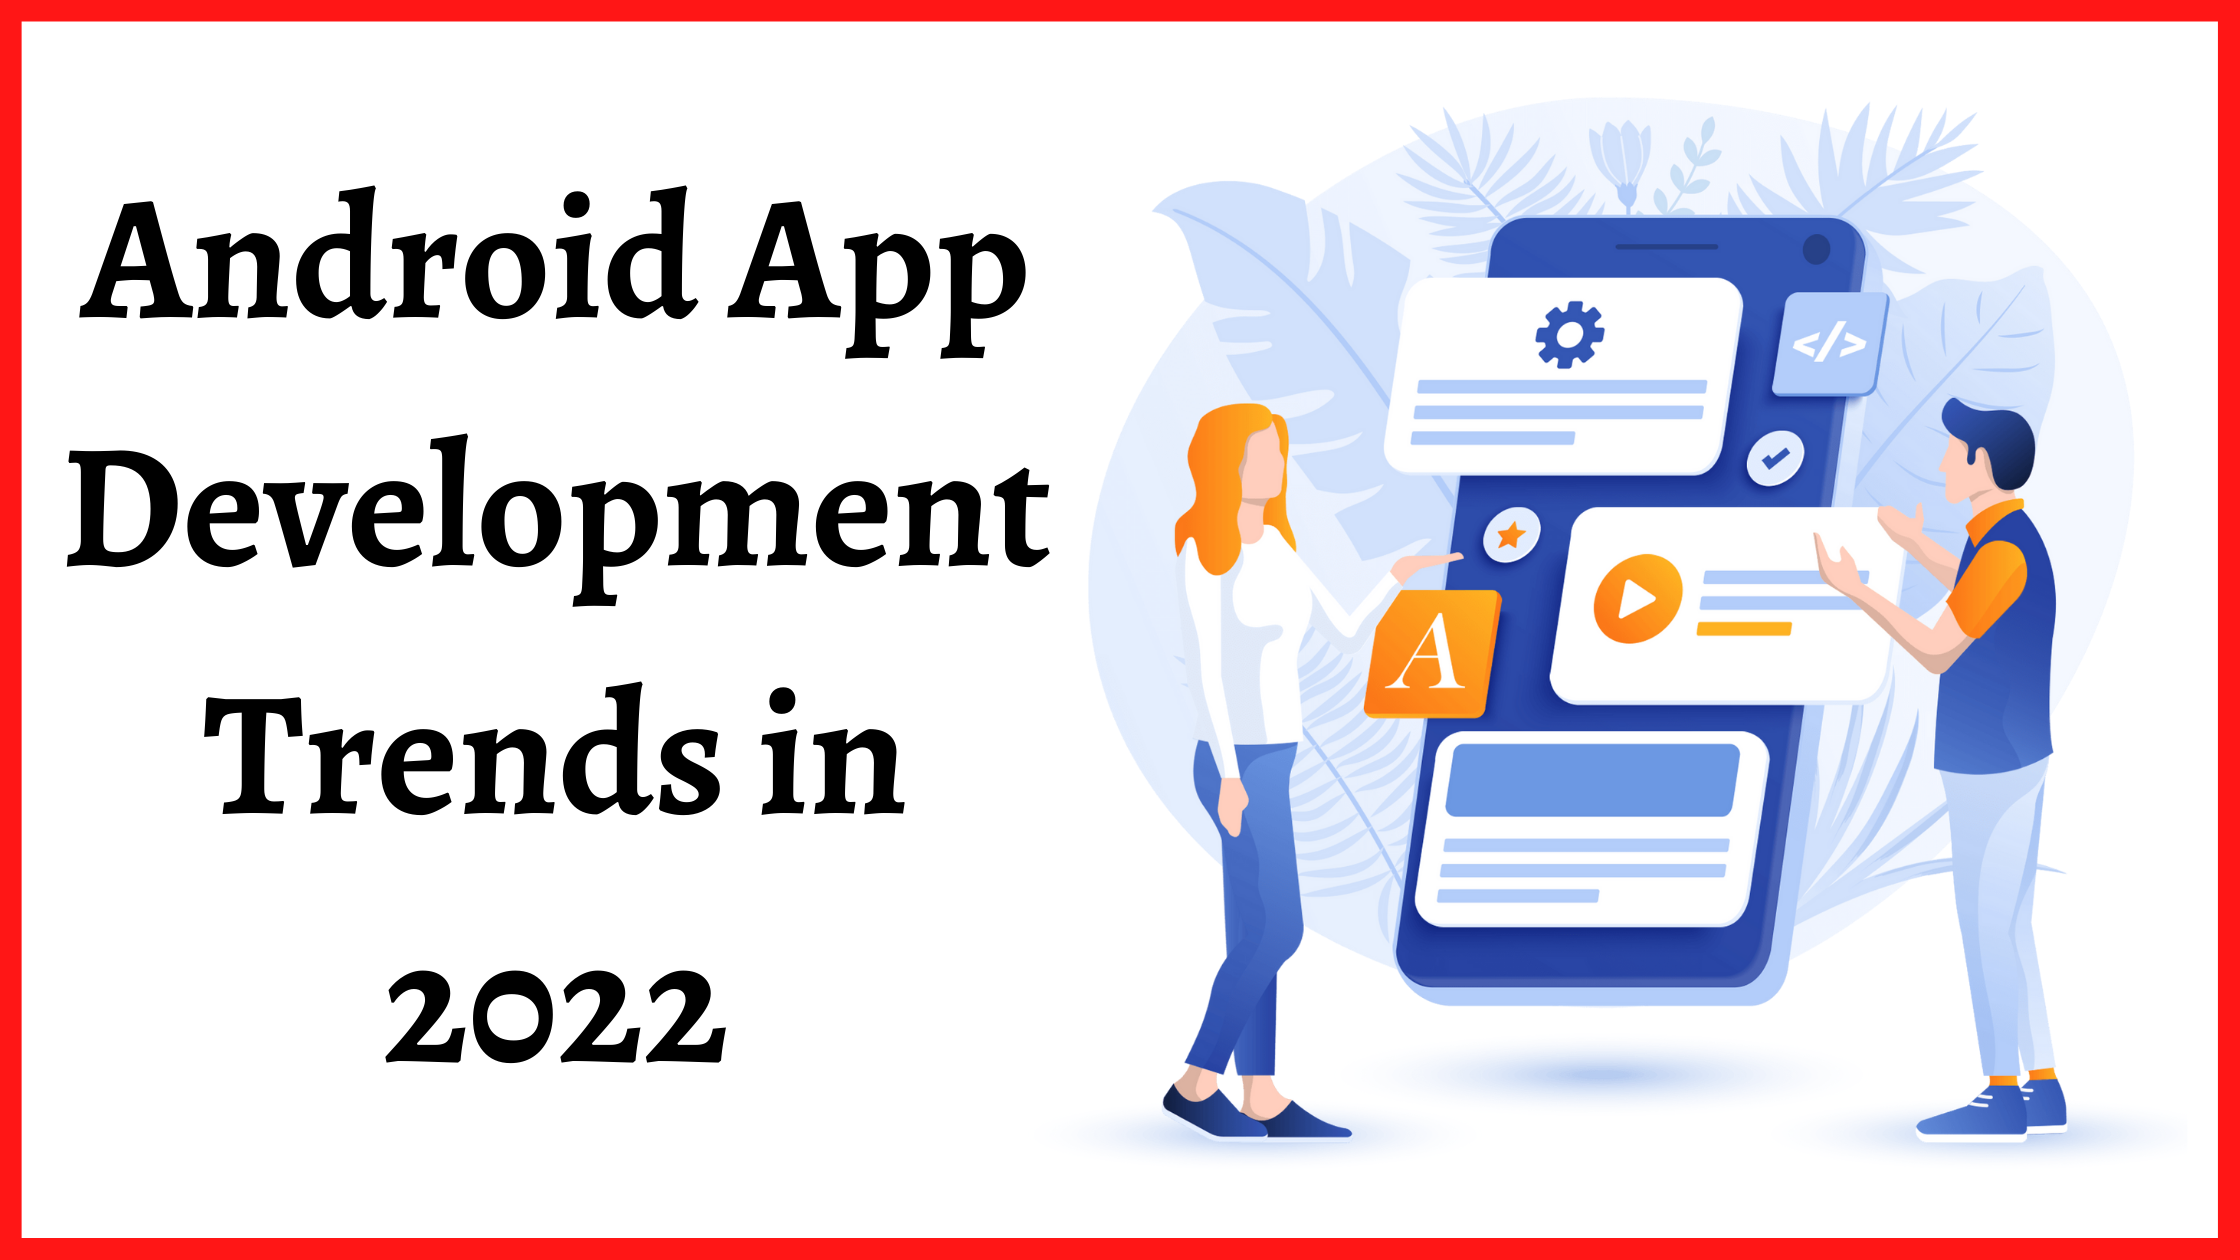 Android App Development Trends for 2022